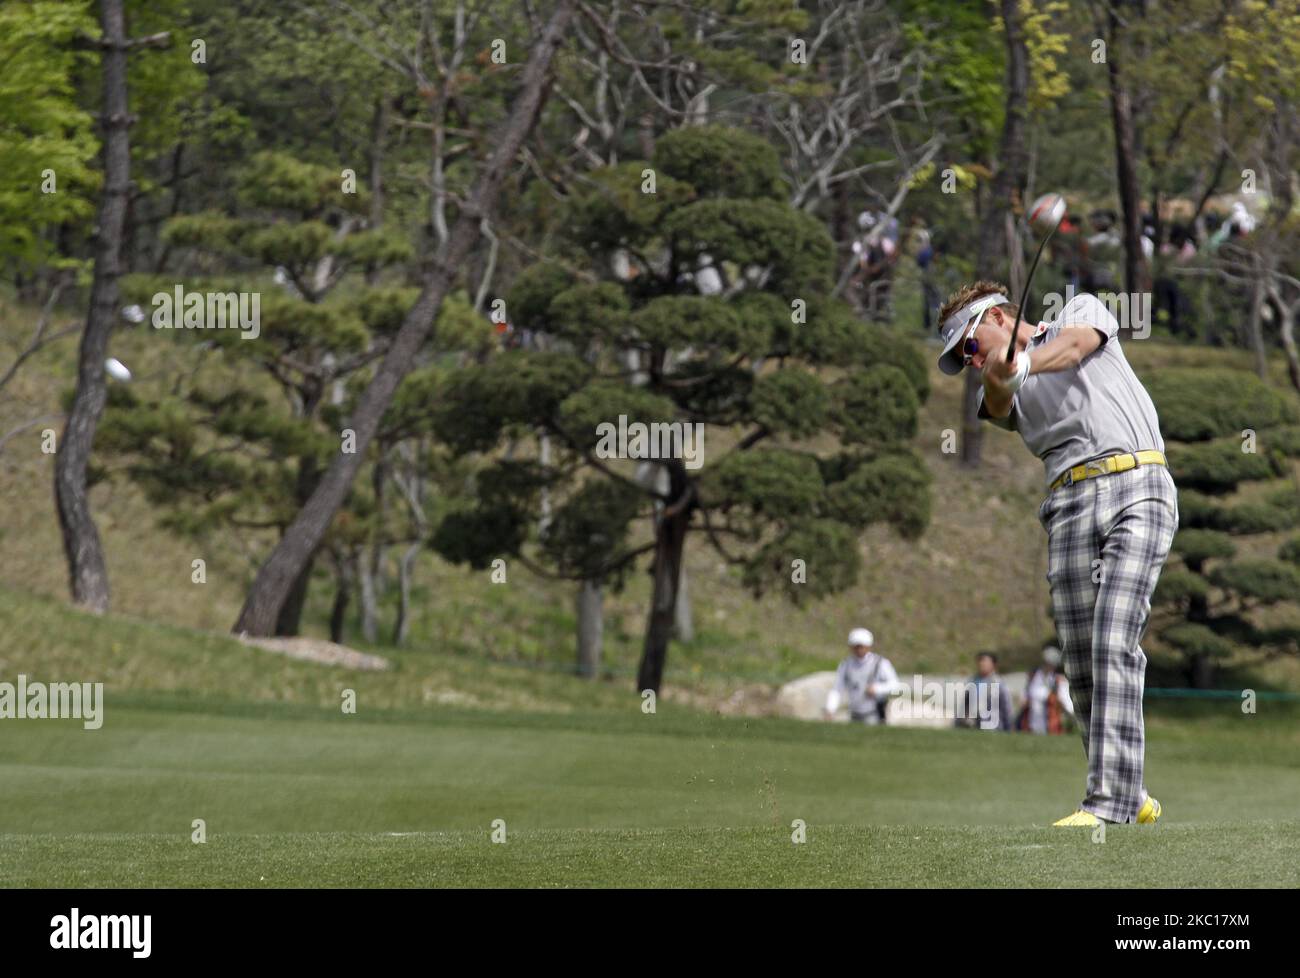 Ian Poulter of England in action during the fourth round of the Ballantine's Championship at Blackstone Golf Club in Icheon, South Korea on April 29, 2012. (Photo by Seung-il Ryu/NurPhoto) Stock Photo